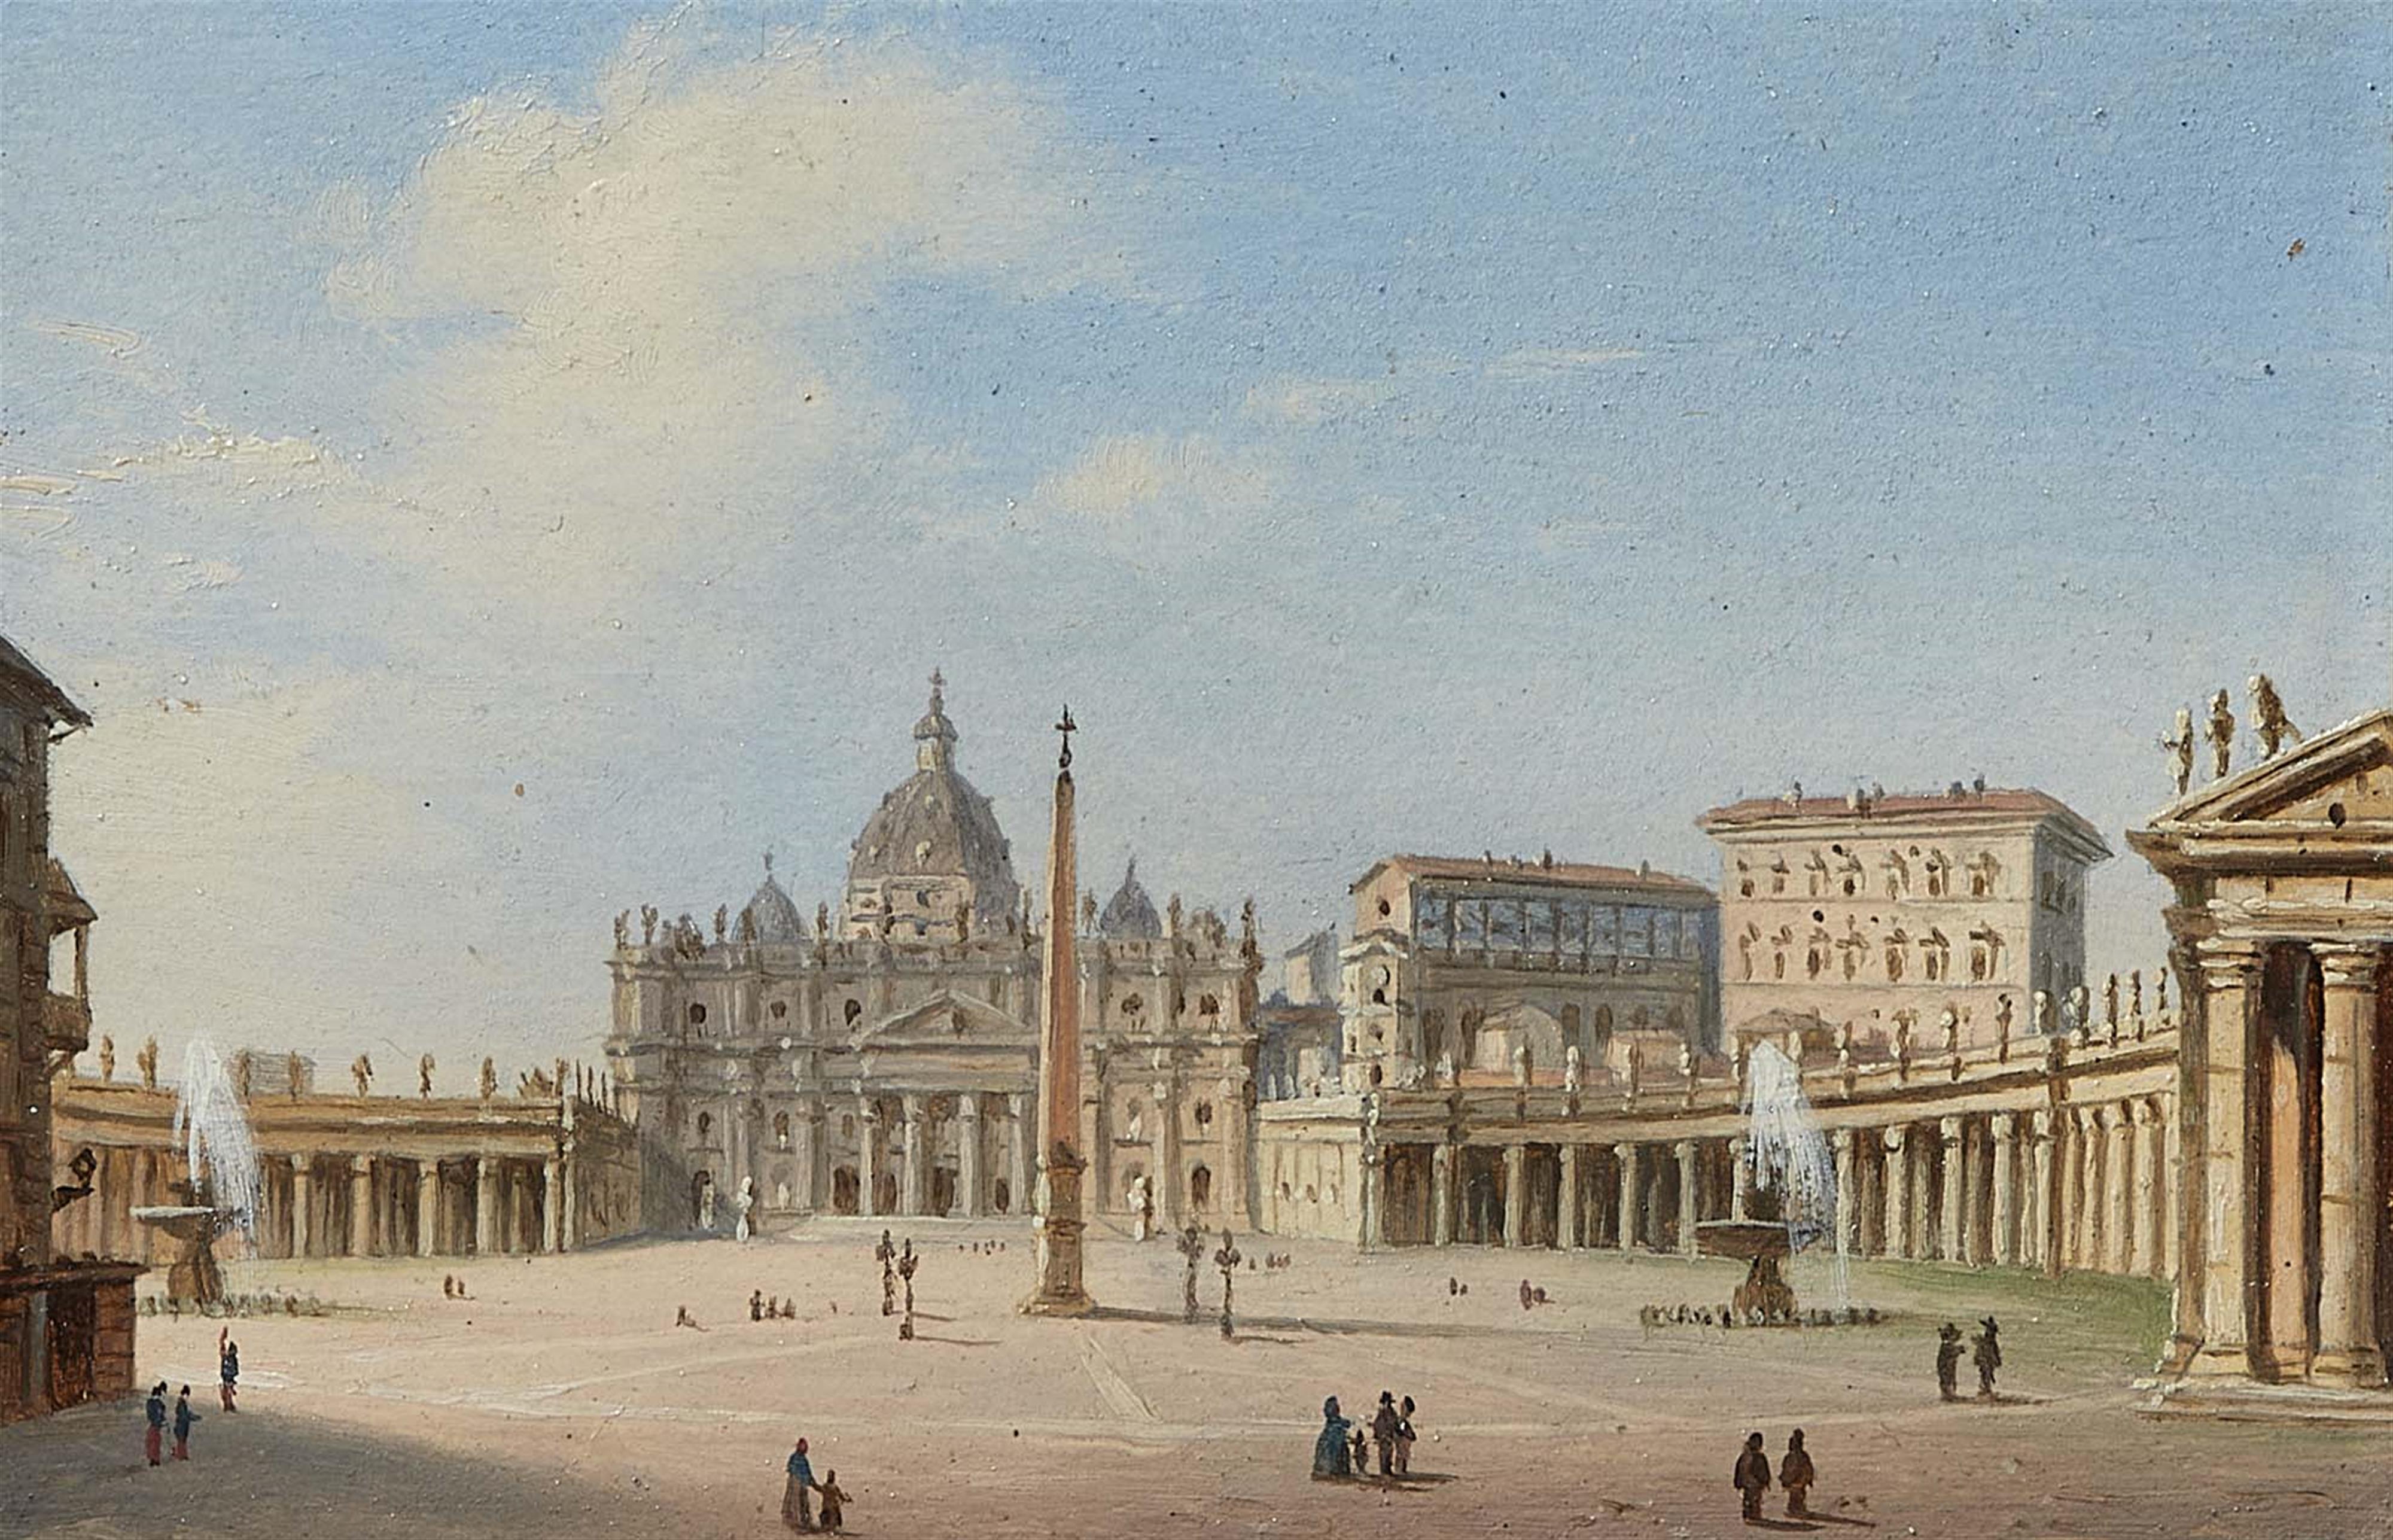 Unknown Artist 19th centry - View of St Peter's Square in Rome
View of Castel Sant'Angelo in Rome - image-1